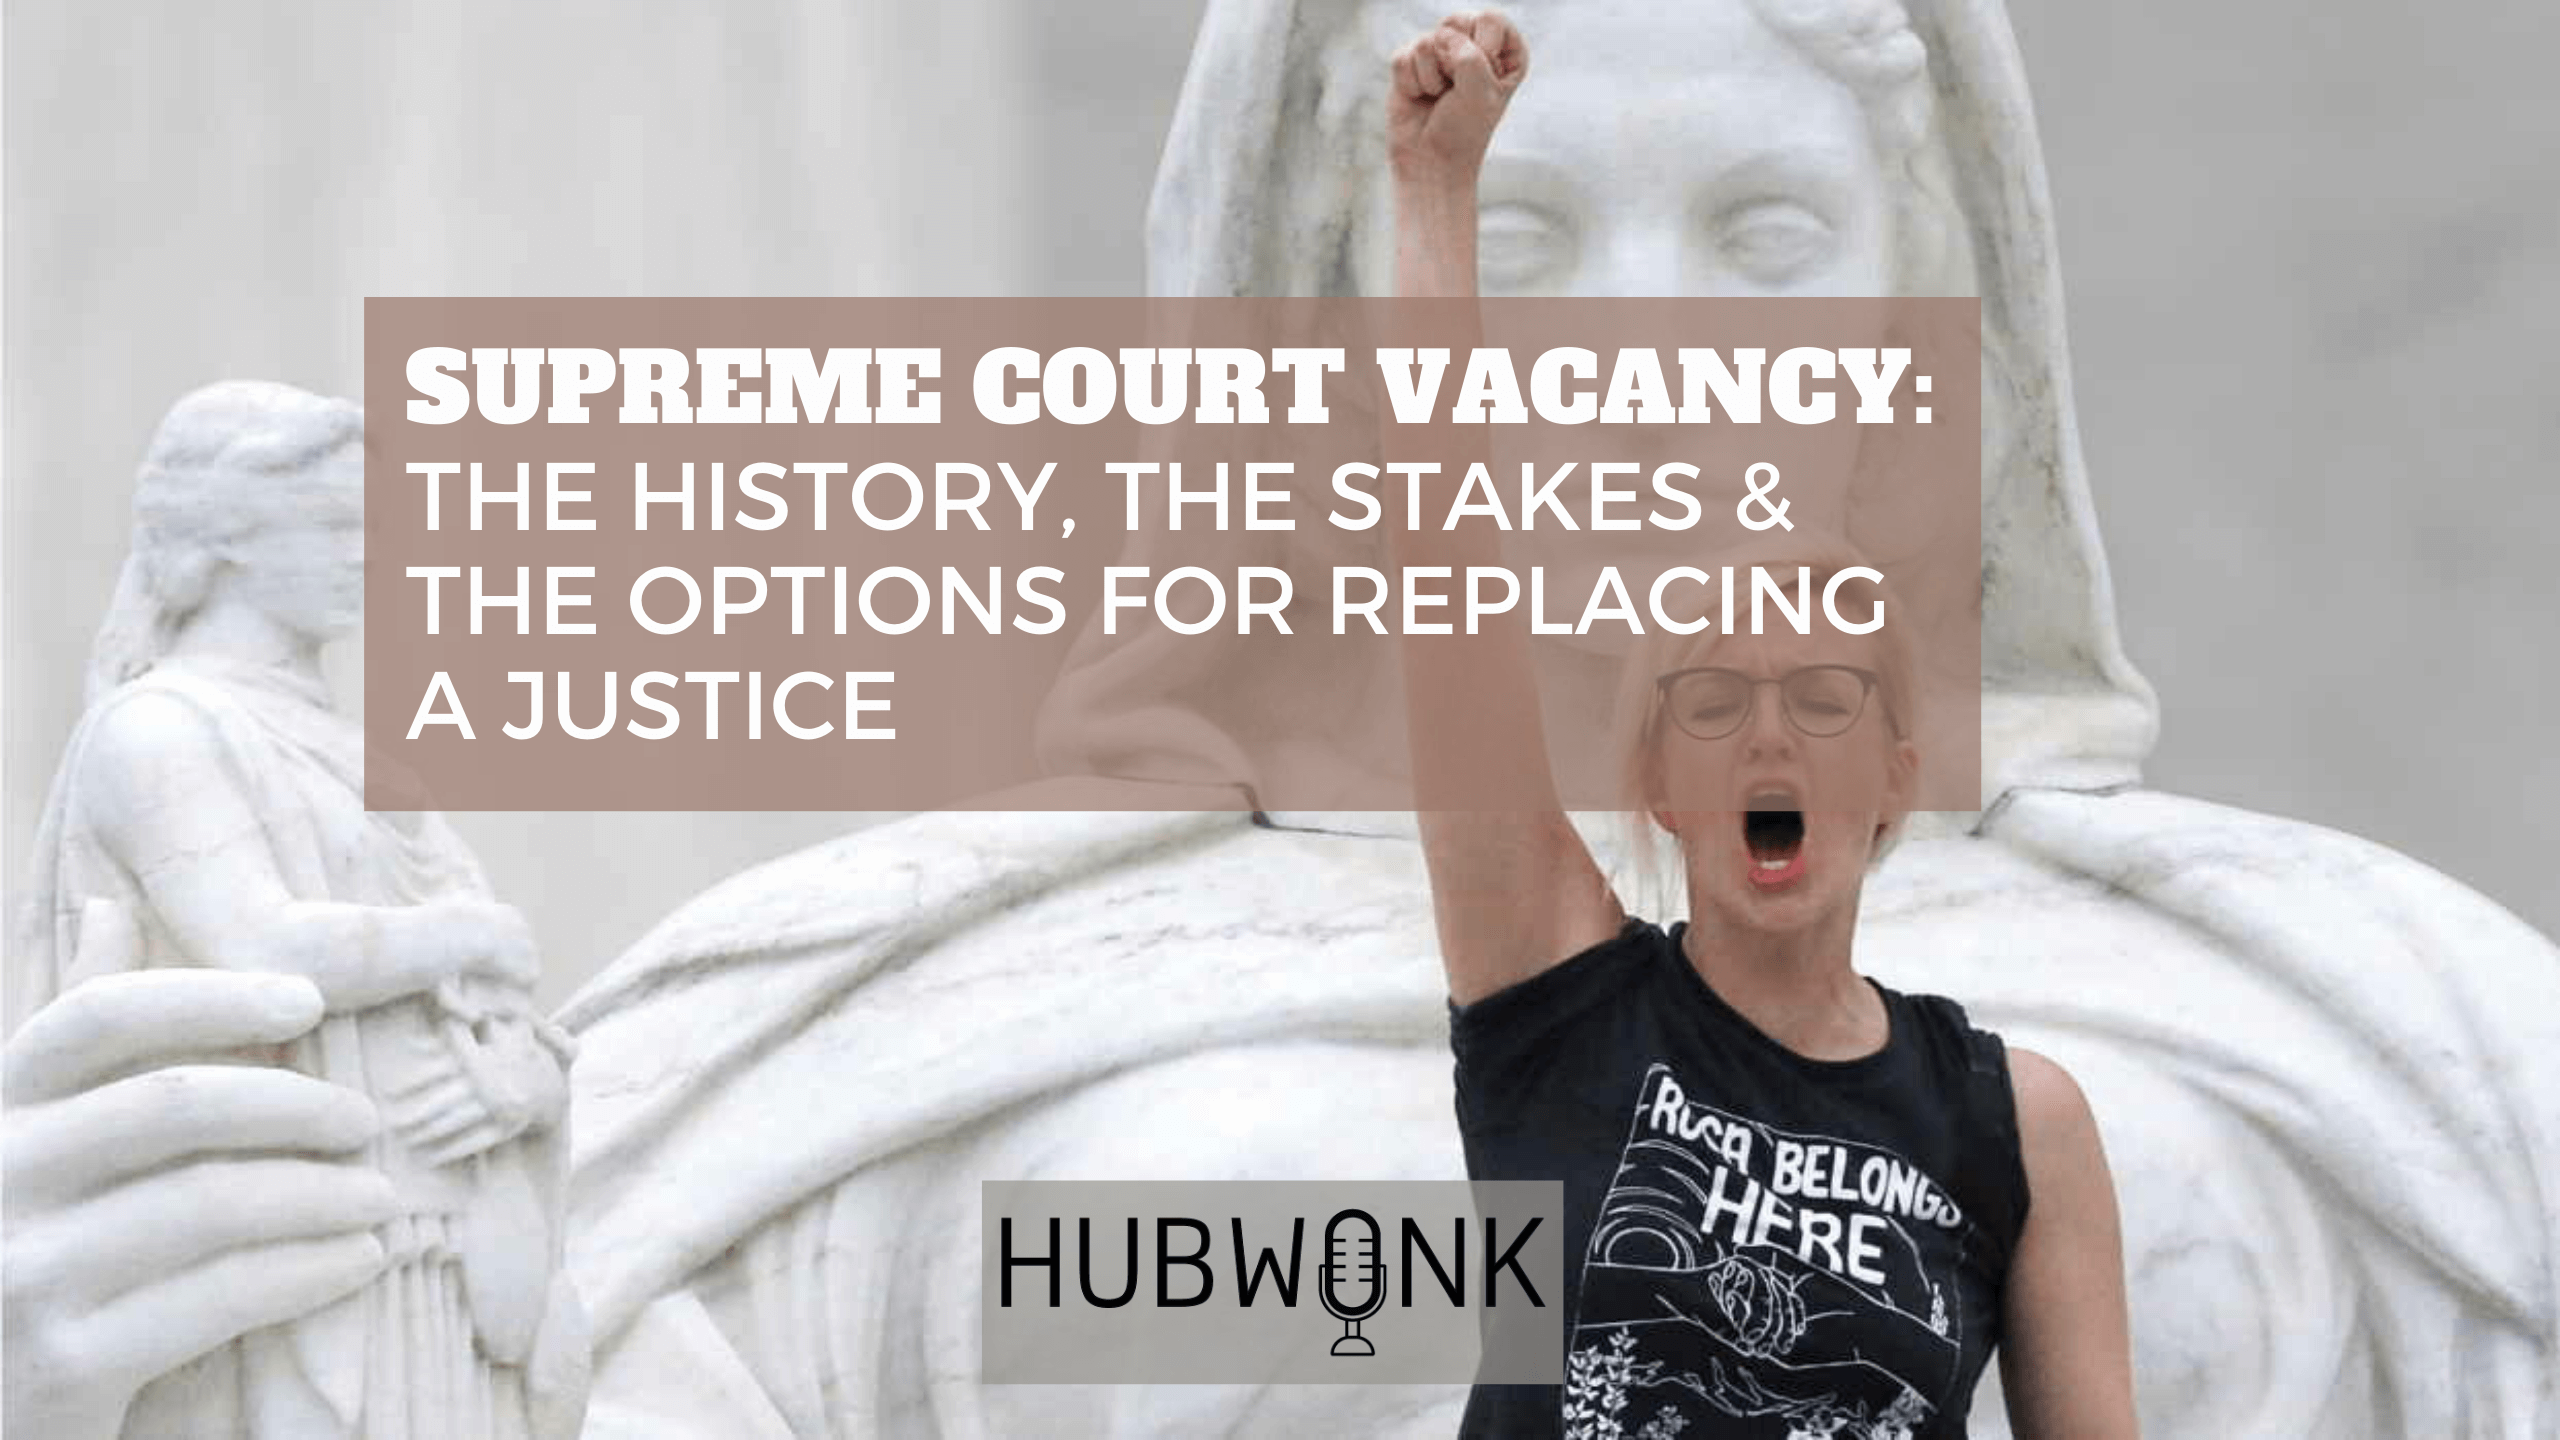 Supreme Court Vacancy: The History, the Stakes & the Options for Replacing a Justice